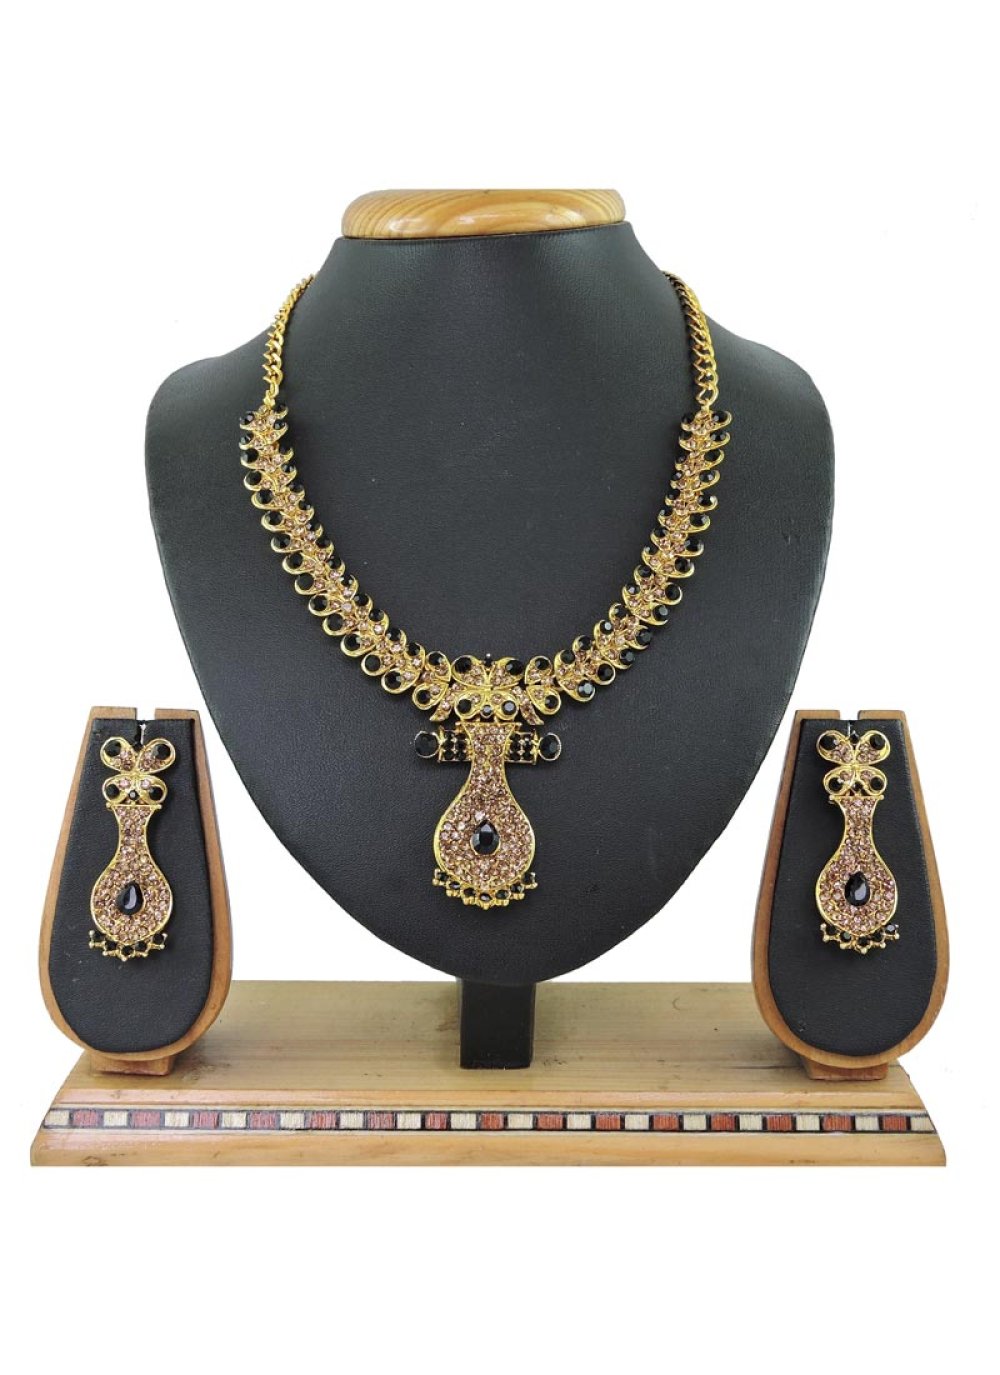 Alluring Alloy Gold Rodium Polish Black and Gold Beads Work Necklace Set